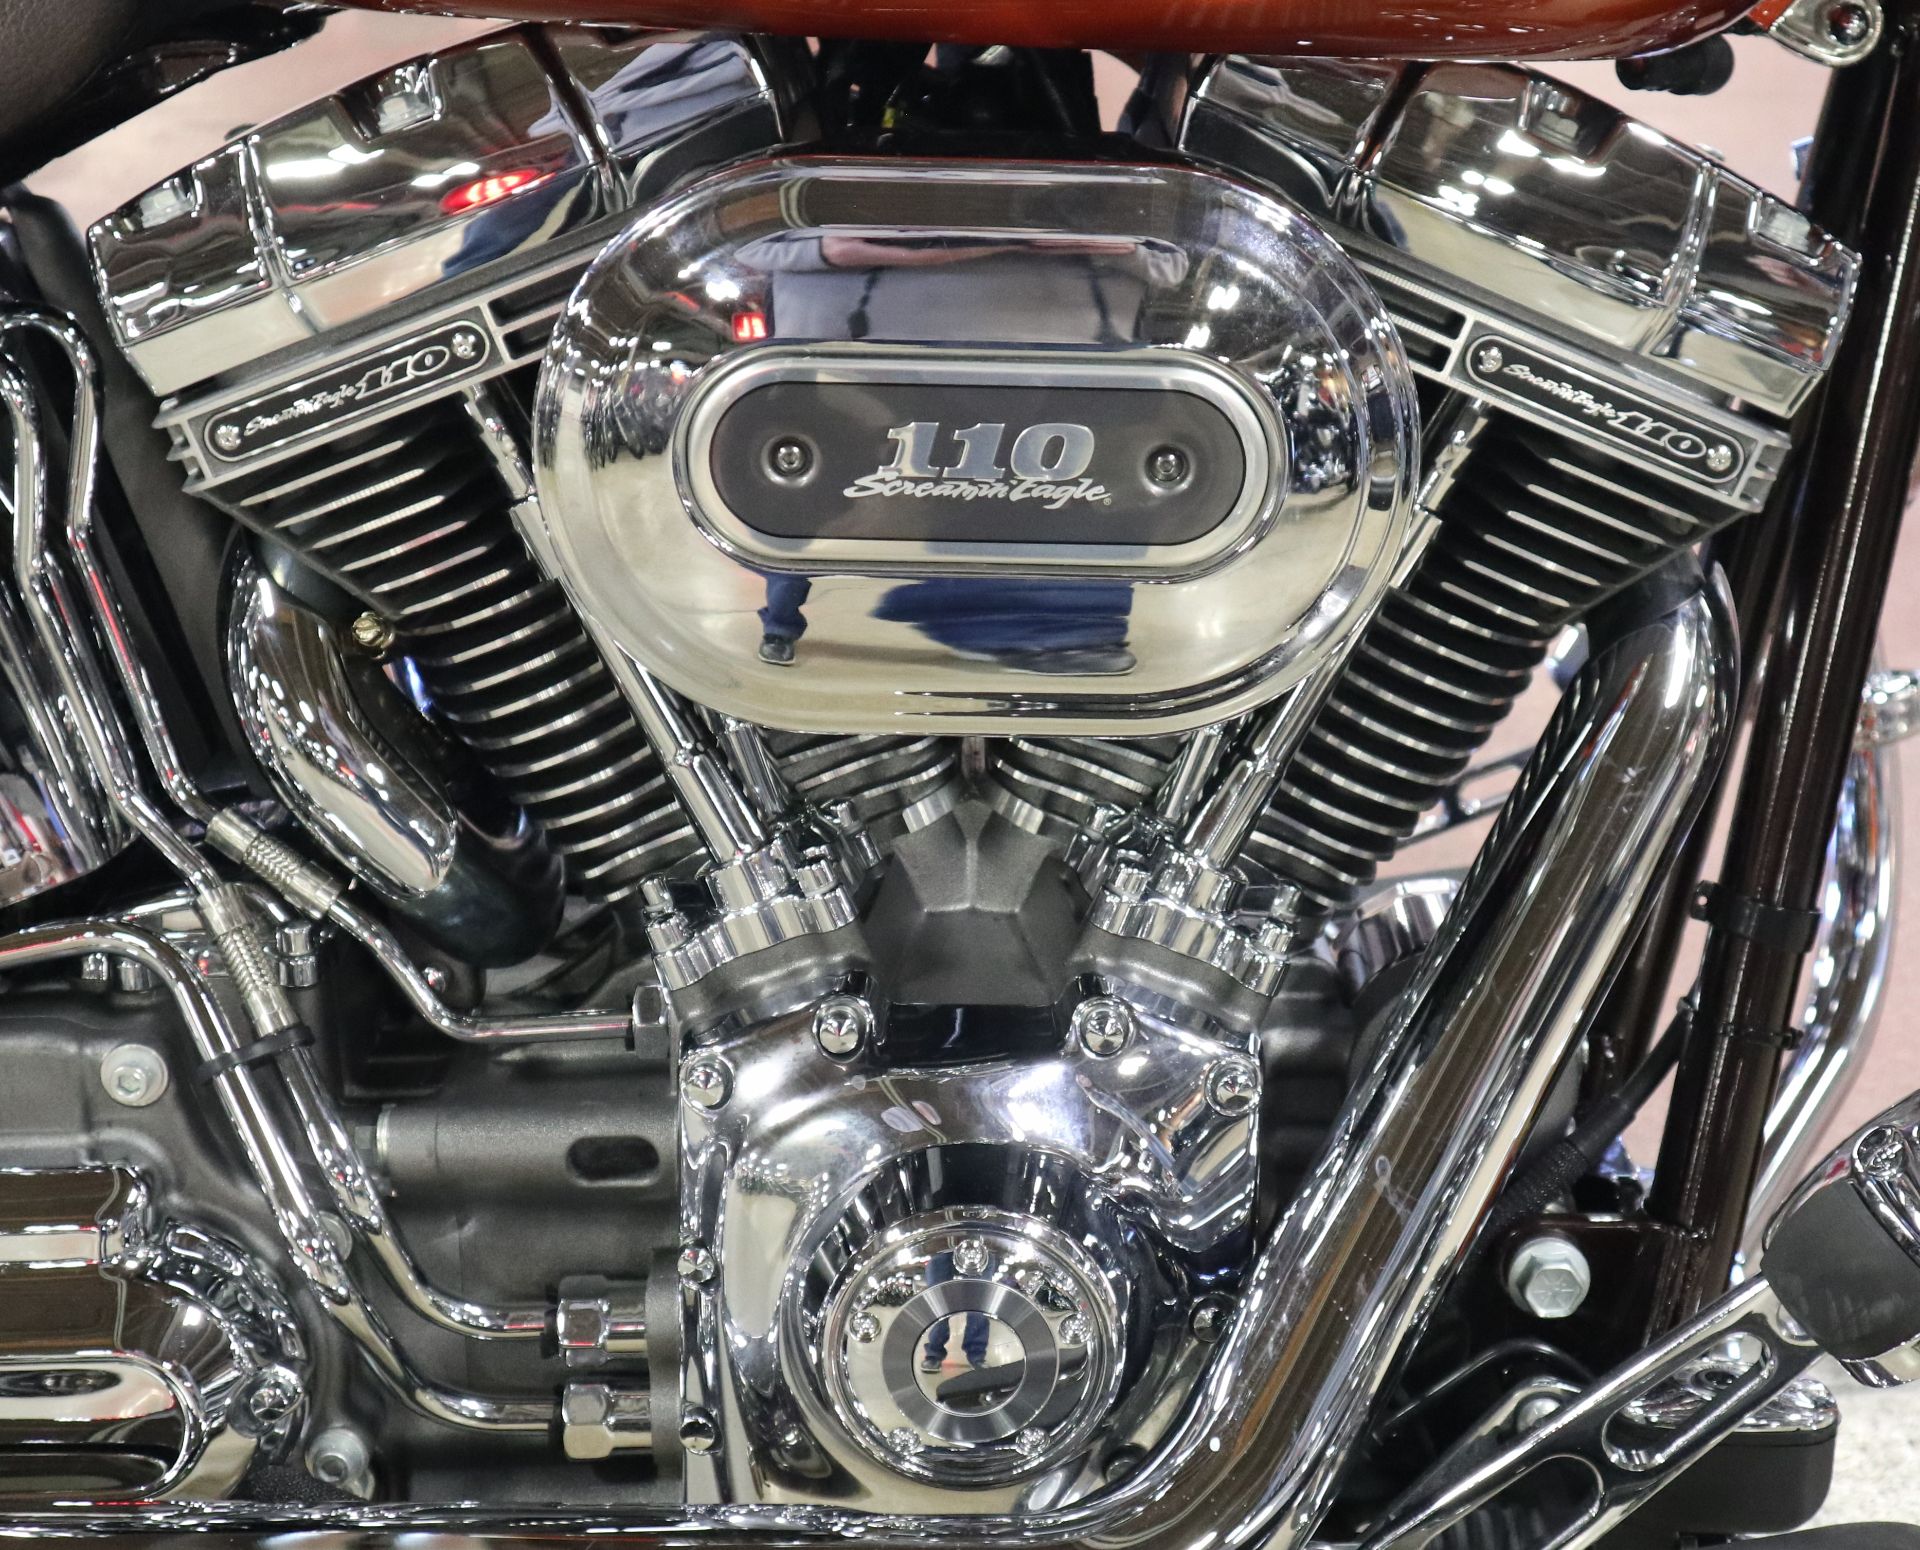 2014 Harley-Davidson CVO™ Softail® Deluxe in New London, Connecticut - Photo 16